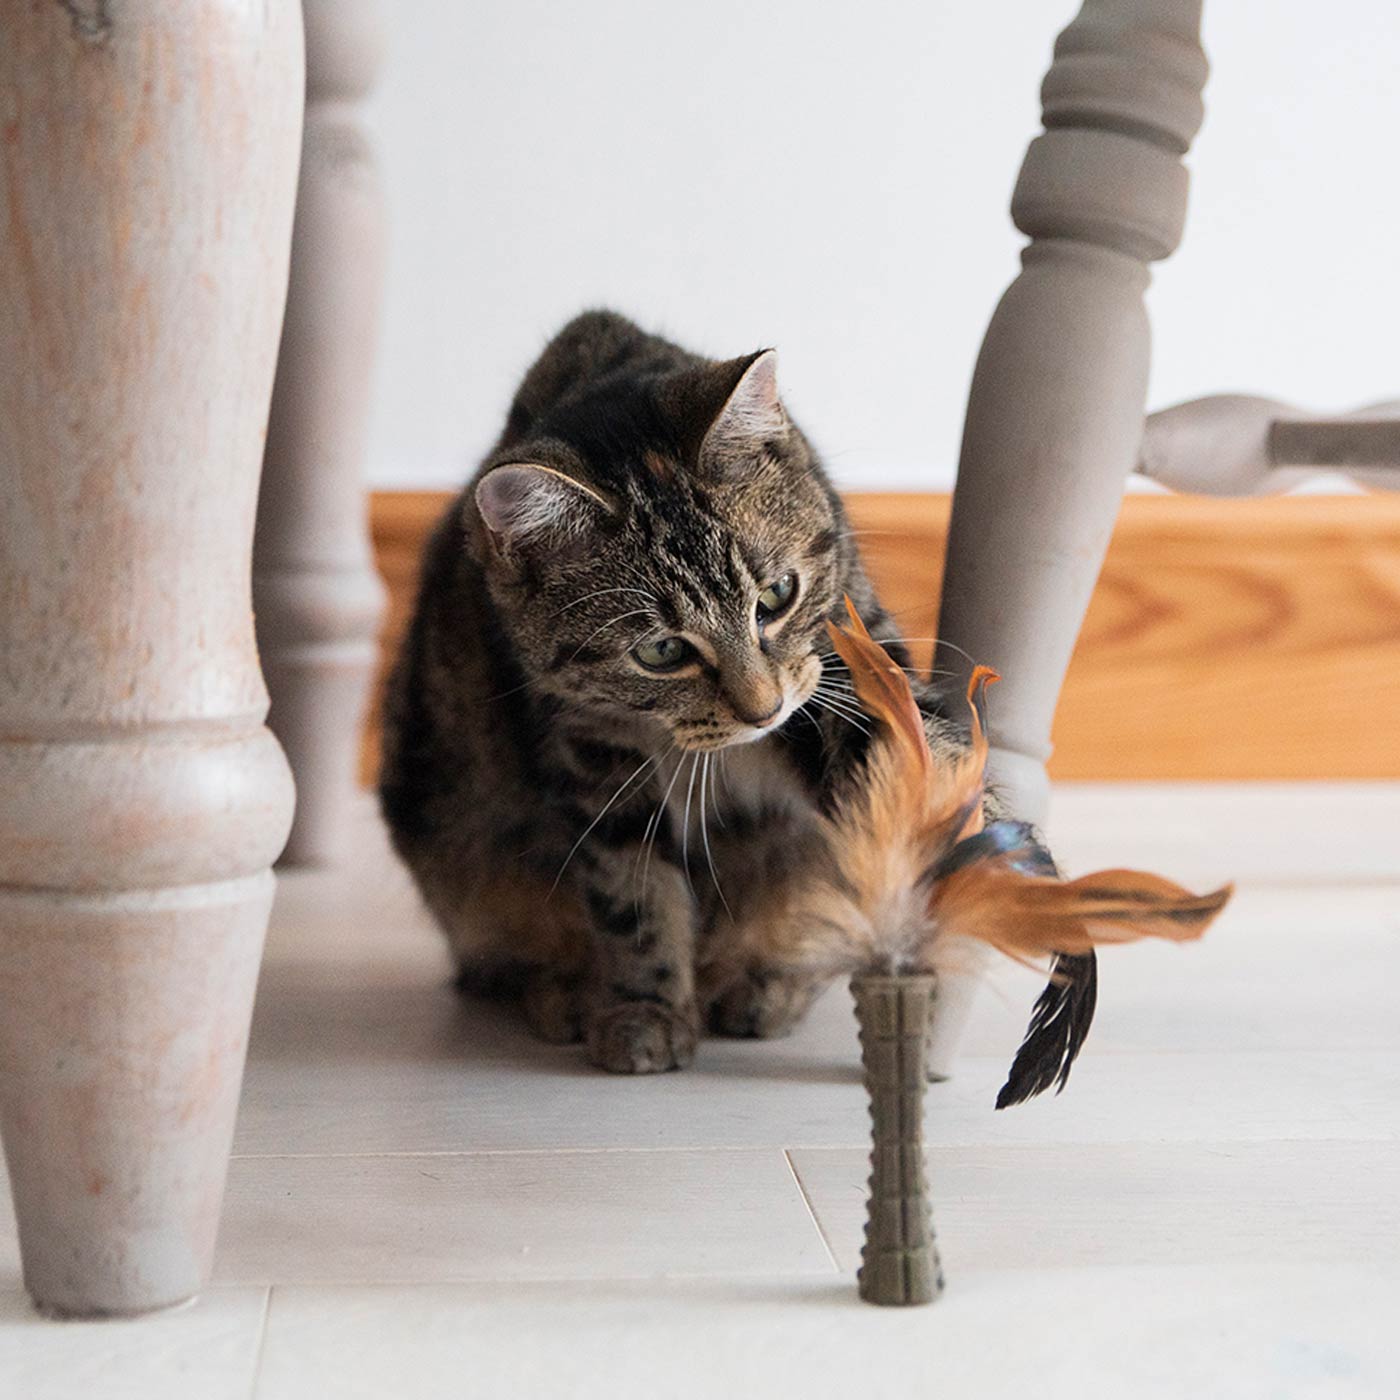 GiGwi Feather Stick Cat Toy